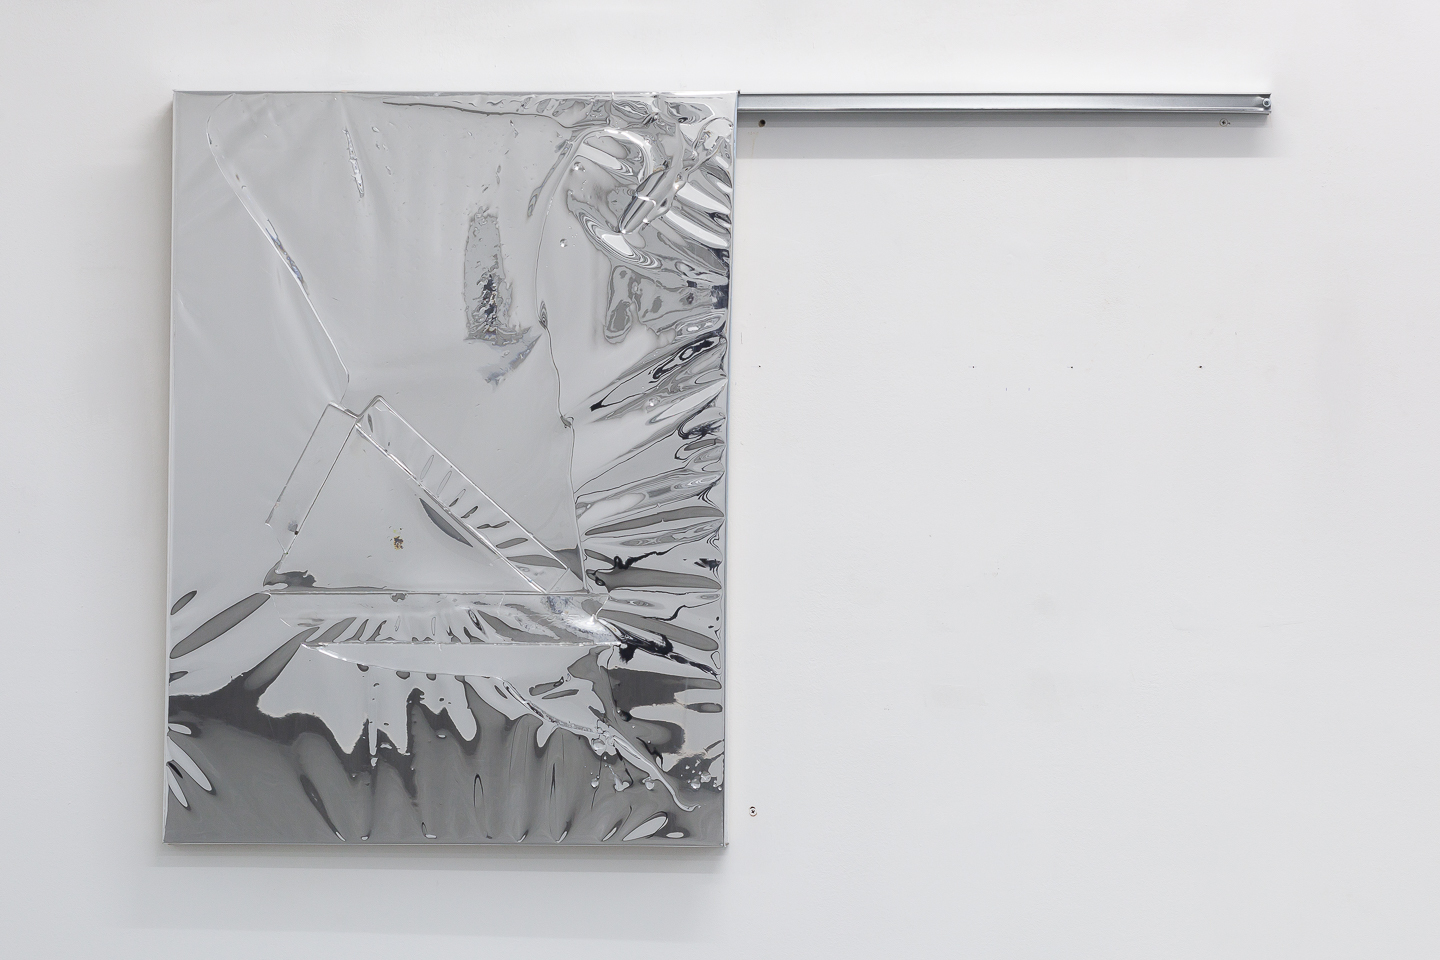 Myles Starr, The Longest Day, 2022, Oil on canvas, mylar, resin, steel track and hardware, 101.6 x 152.4 cm